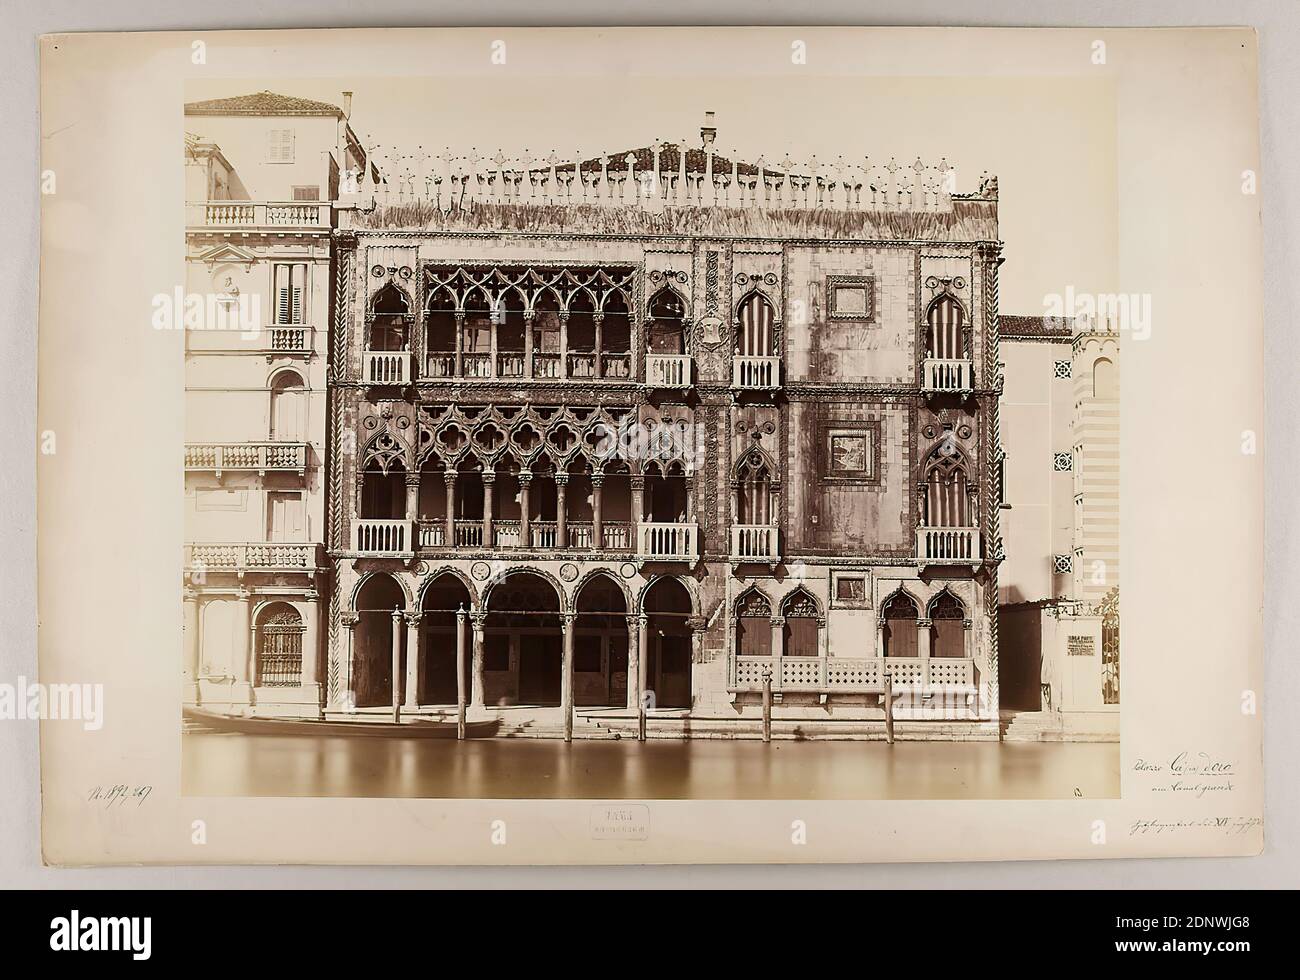 Carlo Naya, Venezia - Ca' d'Oro, 1892. Albumin paper, black and white positive process, sheet size: height: 26.50 cm; width: 35.00 cm, stamp engraving: Naya Fotografo, inscribed: Palazzo Ca (sa) D'oro on the Canalgrande, label: 13, Venezia Palazzo Ca' D'oro; 15.° secolo, architectural photography, travel photography, profane architecture, facade, house, building, canal Stock Photo